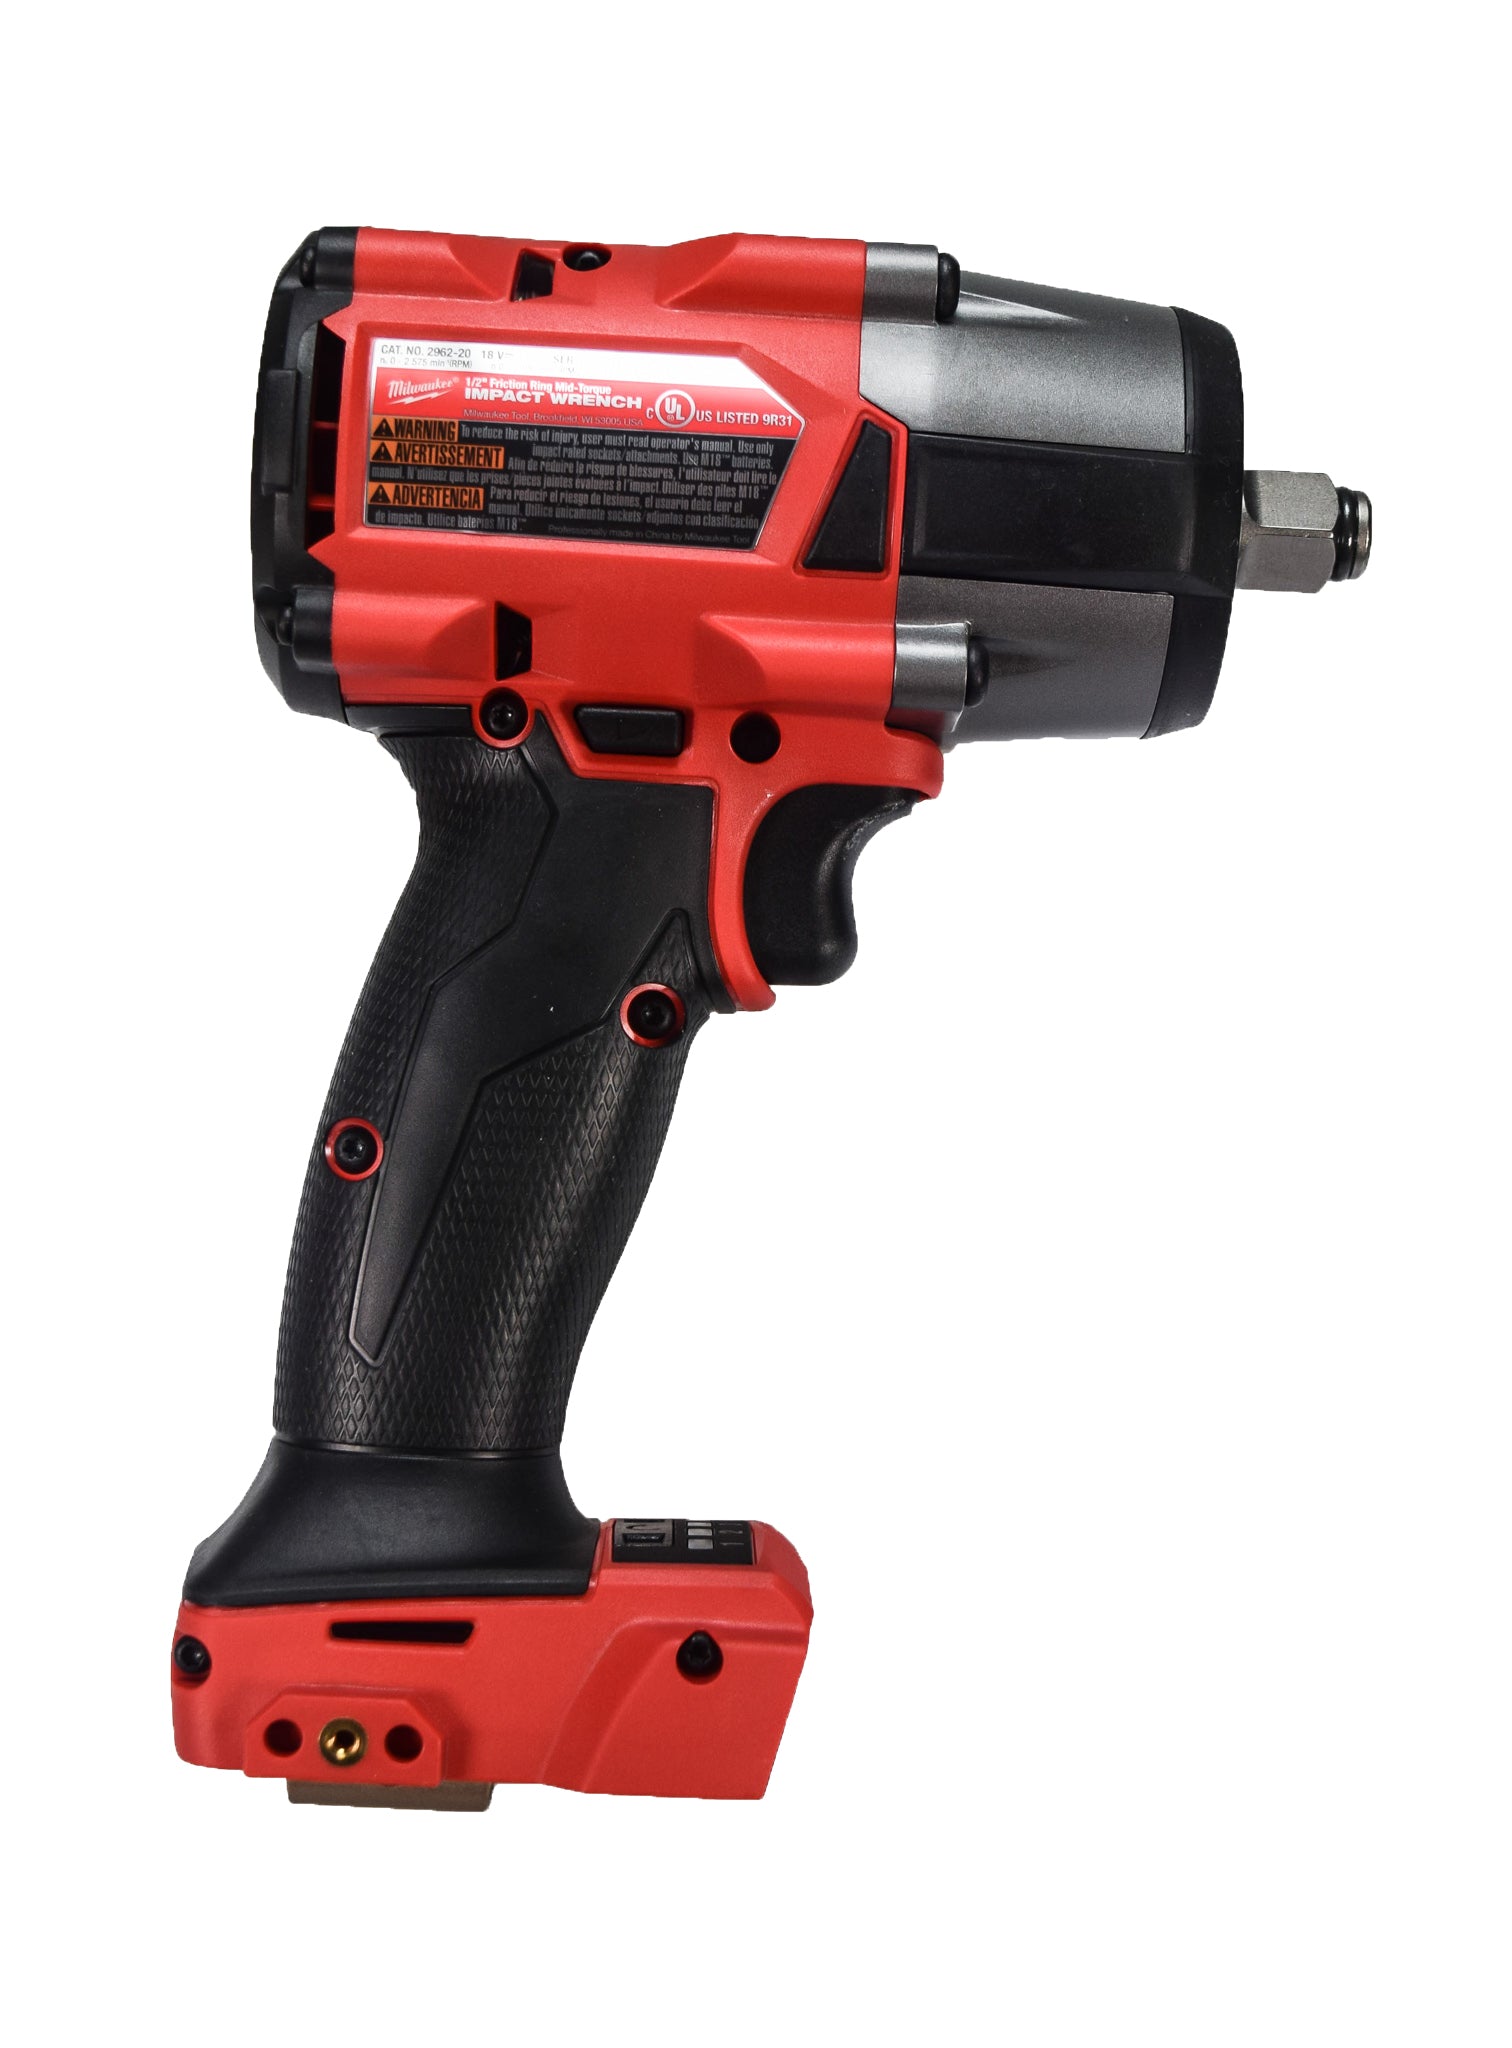 Milwaukee 2855-20 M18 FUEL 1/2 Compact Impact Wrench w/ Friction Ring Bare  Tool